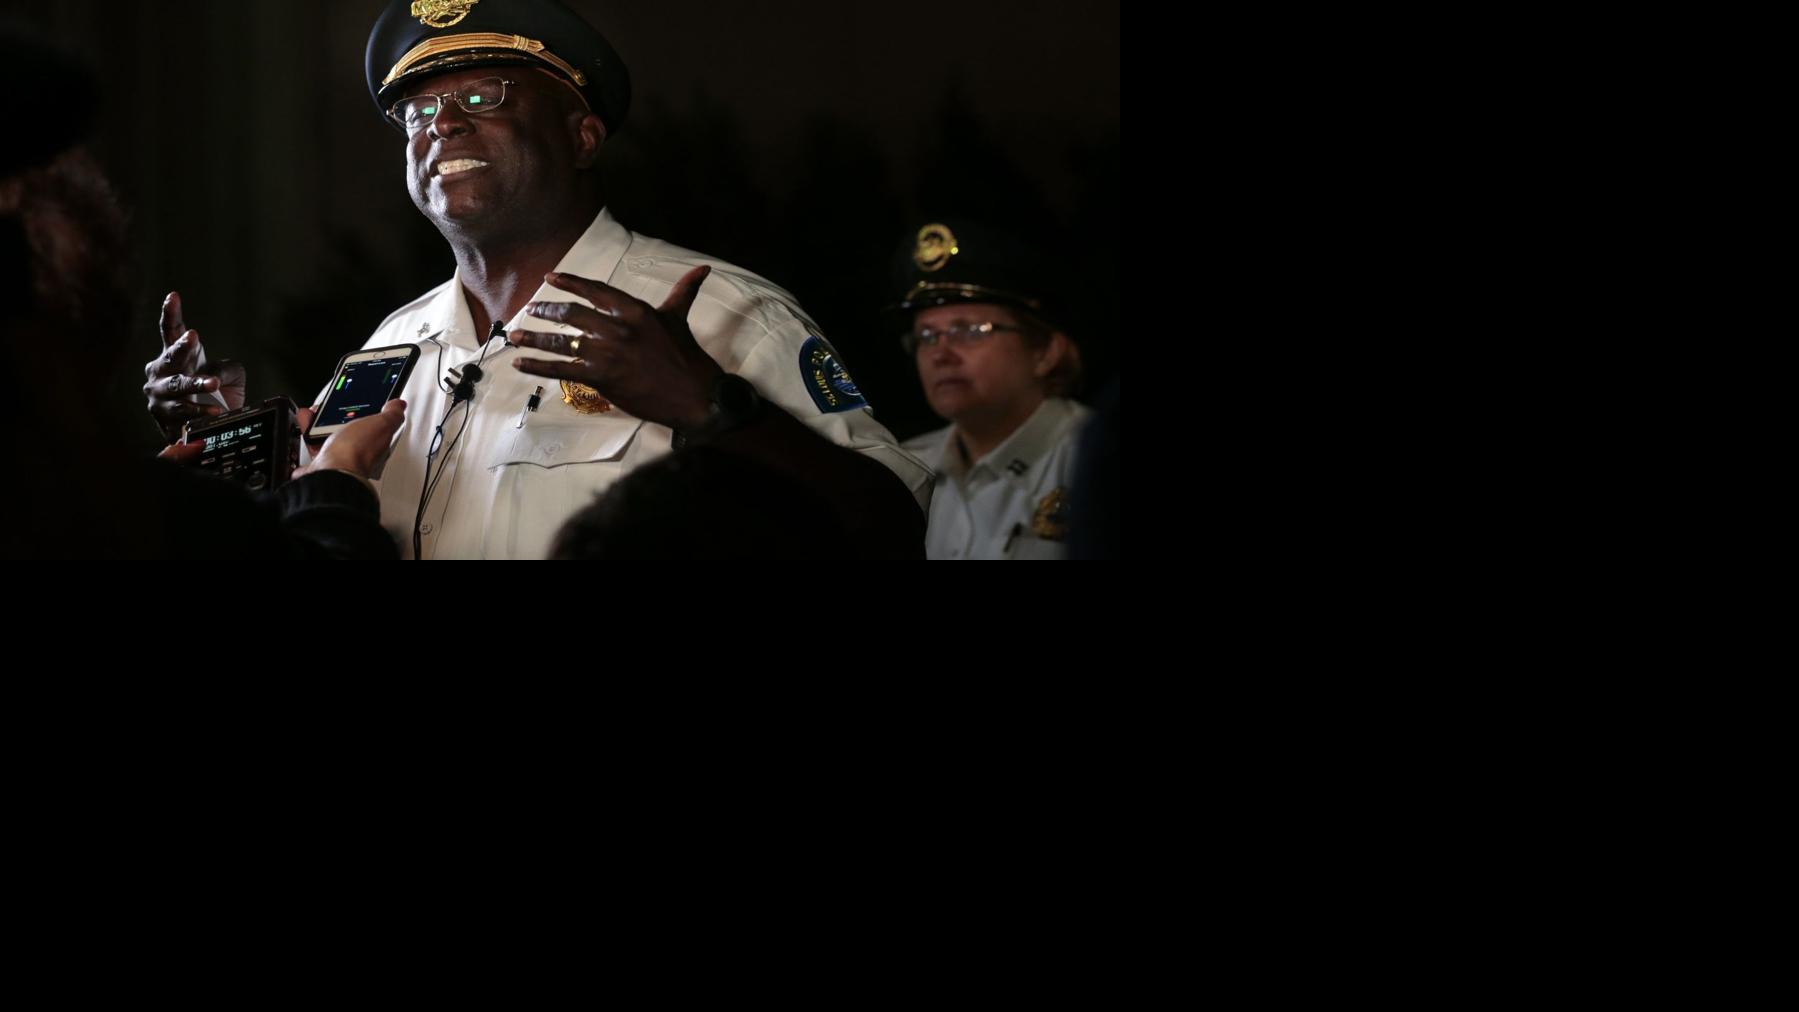 Inside the Post-Dispatch: A talk with St. Louis Police Chief John Hayden on gun violence | Law ...